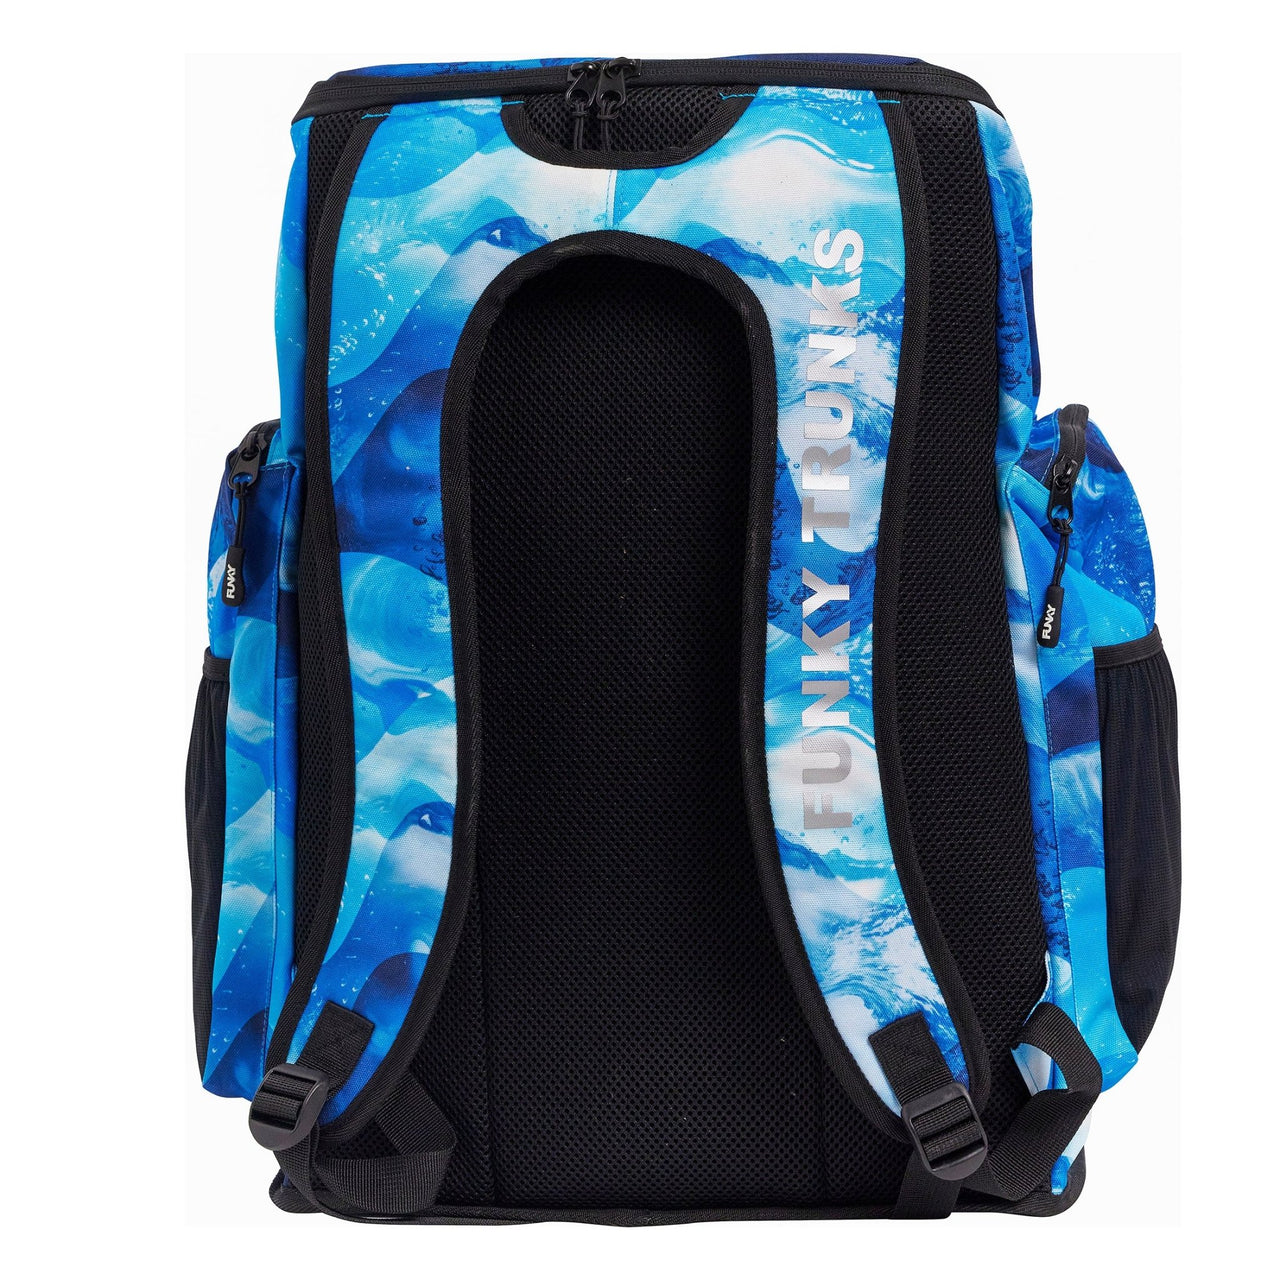 FUNKY TRUNKS DIVE IN SPACE CASE BACKPACK - Blue